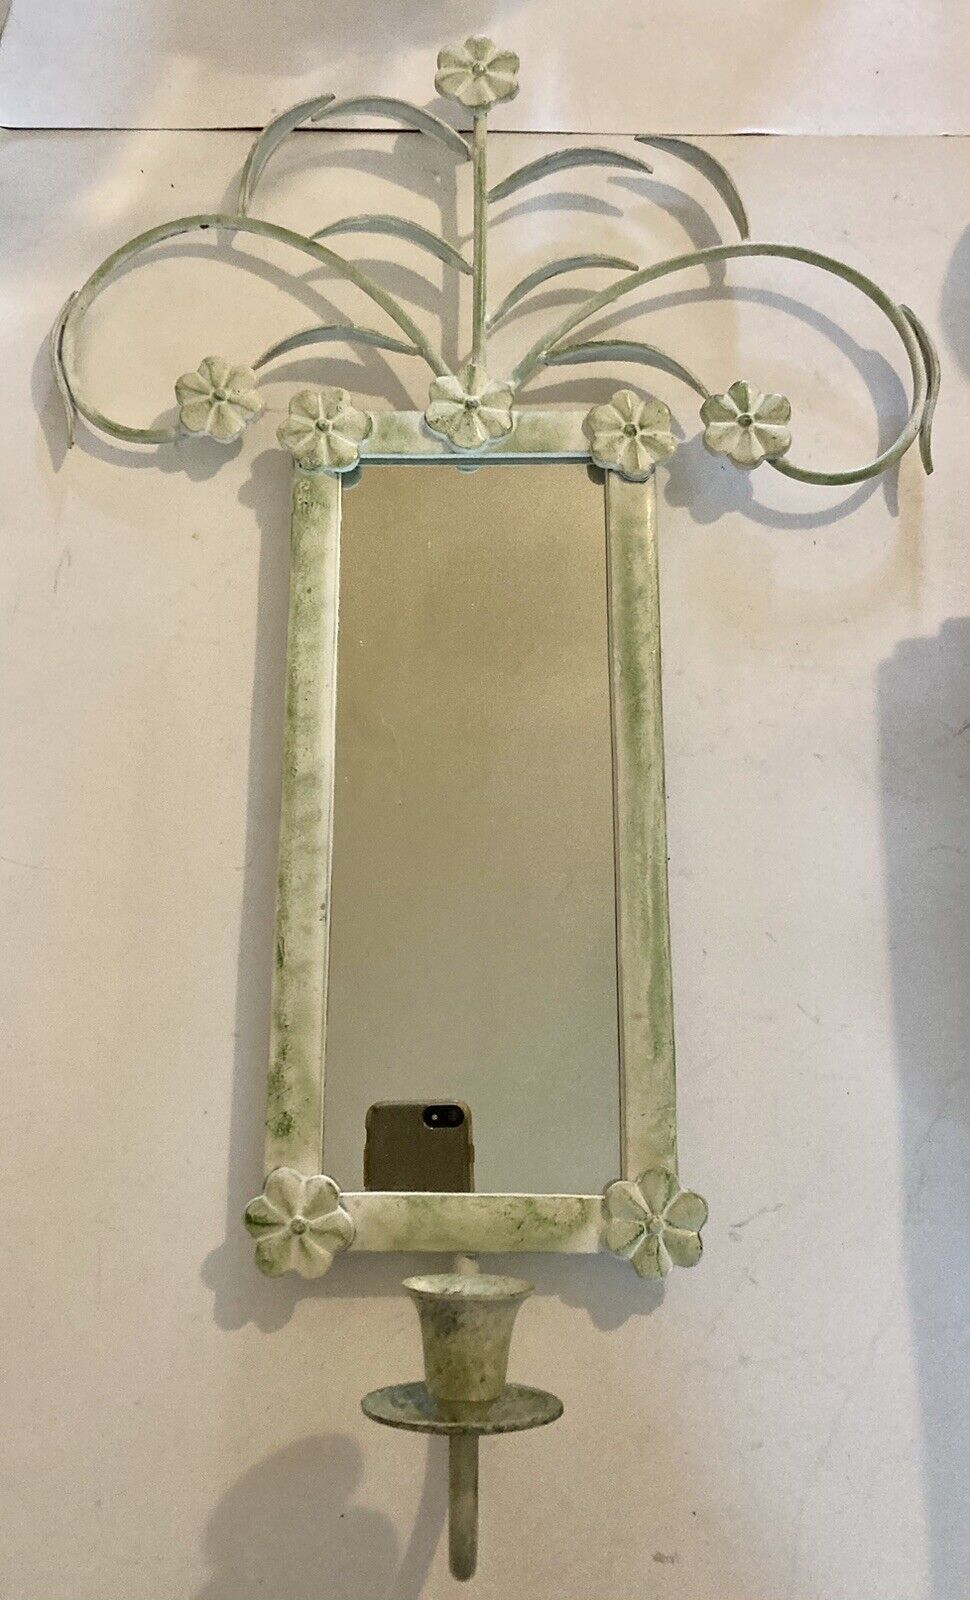 Vintage 21”H x 13”W Heavy Metal Mirrored Green Wall Candle Holder/Sconce - India